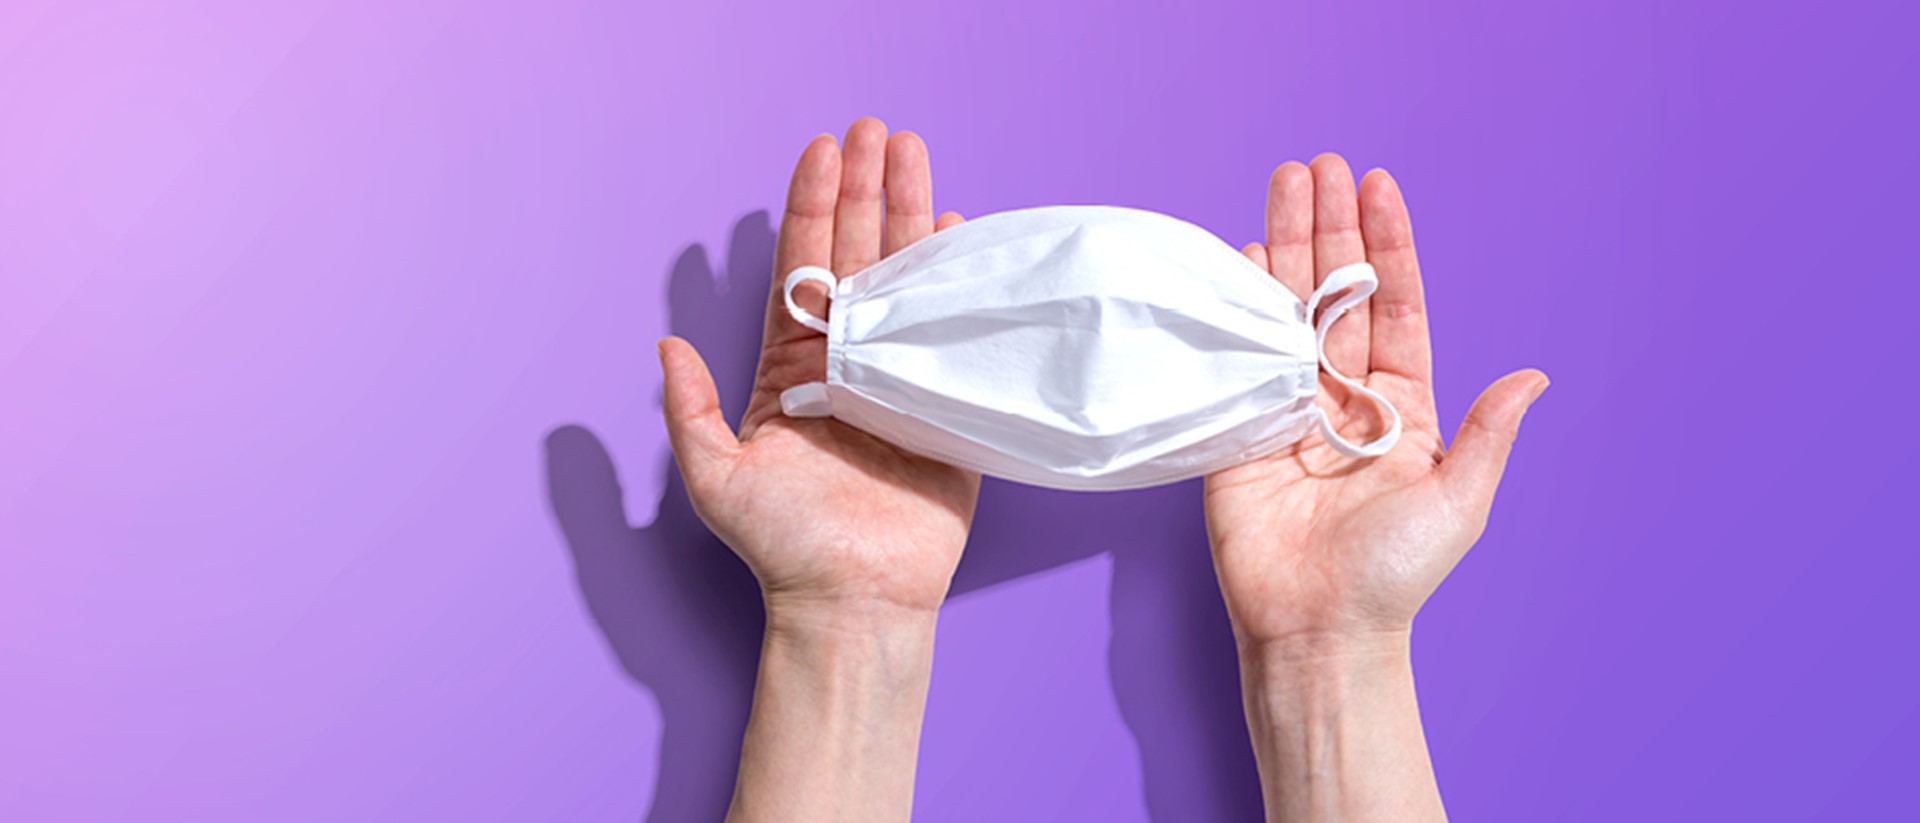 Image of a white surgical mask in a pair of hands on a purple background